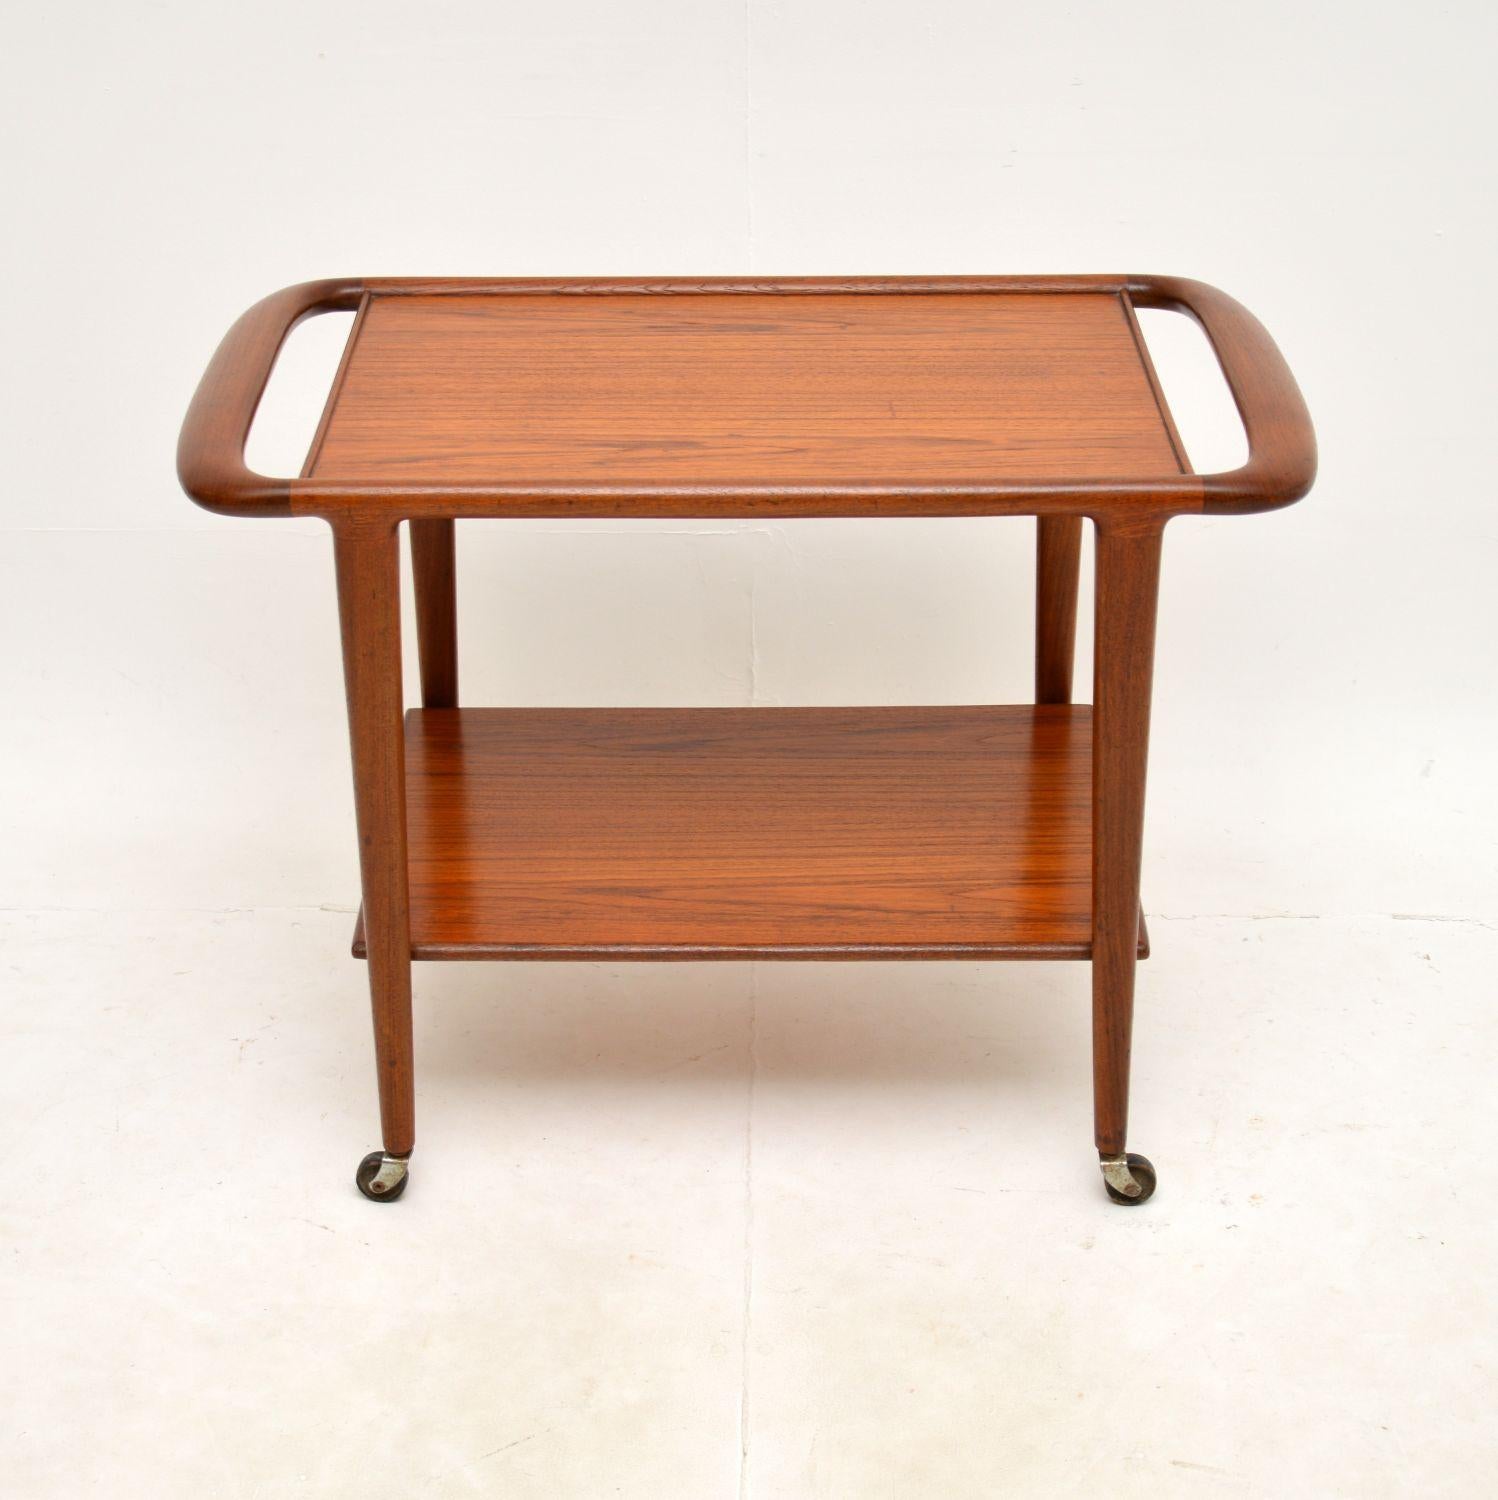 A very stylish and extremely well made Danish vintage teak drinks trolley by Niels Moller. This was made in Denmark by JLM Mobelfabrik, it dates from the 1960’s.

It is of superb quality and is beautifully designed, with lovely curved edges and